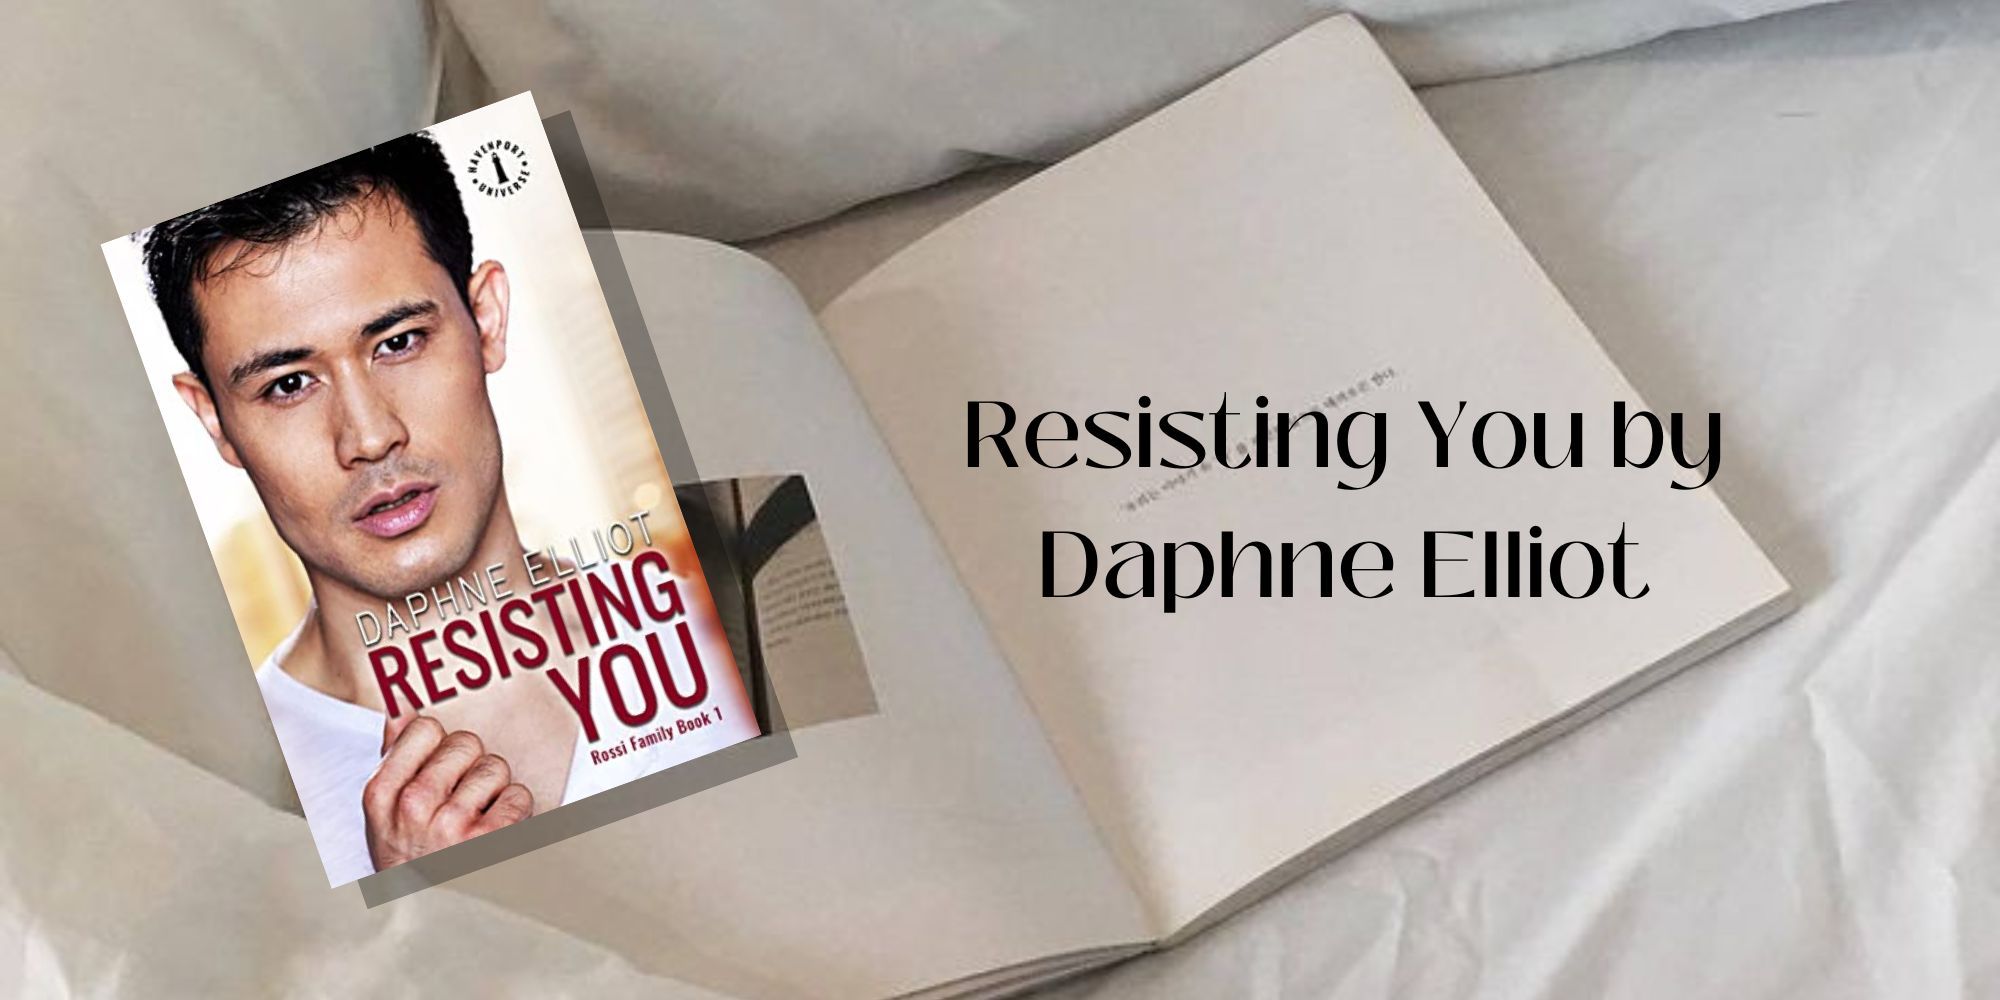 The cover of Resisting You by Daphne Elliot